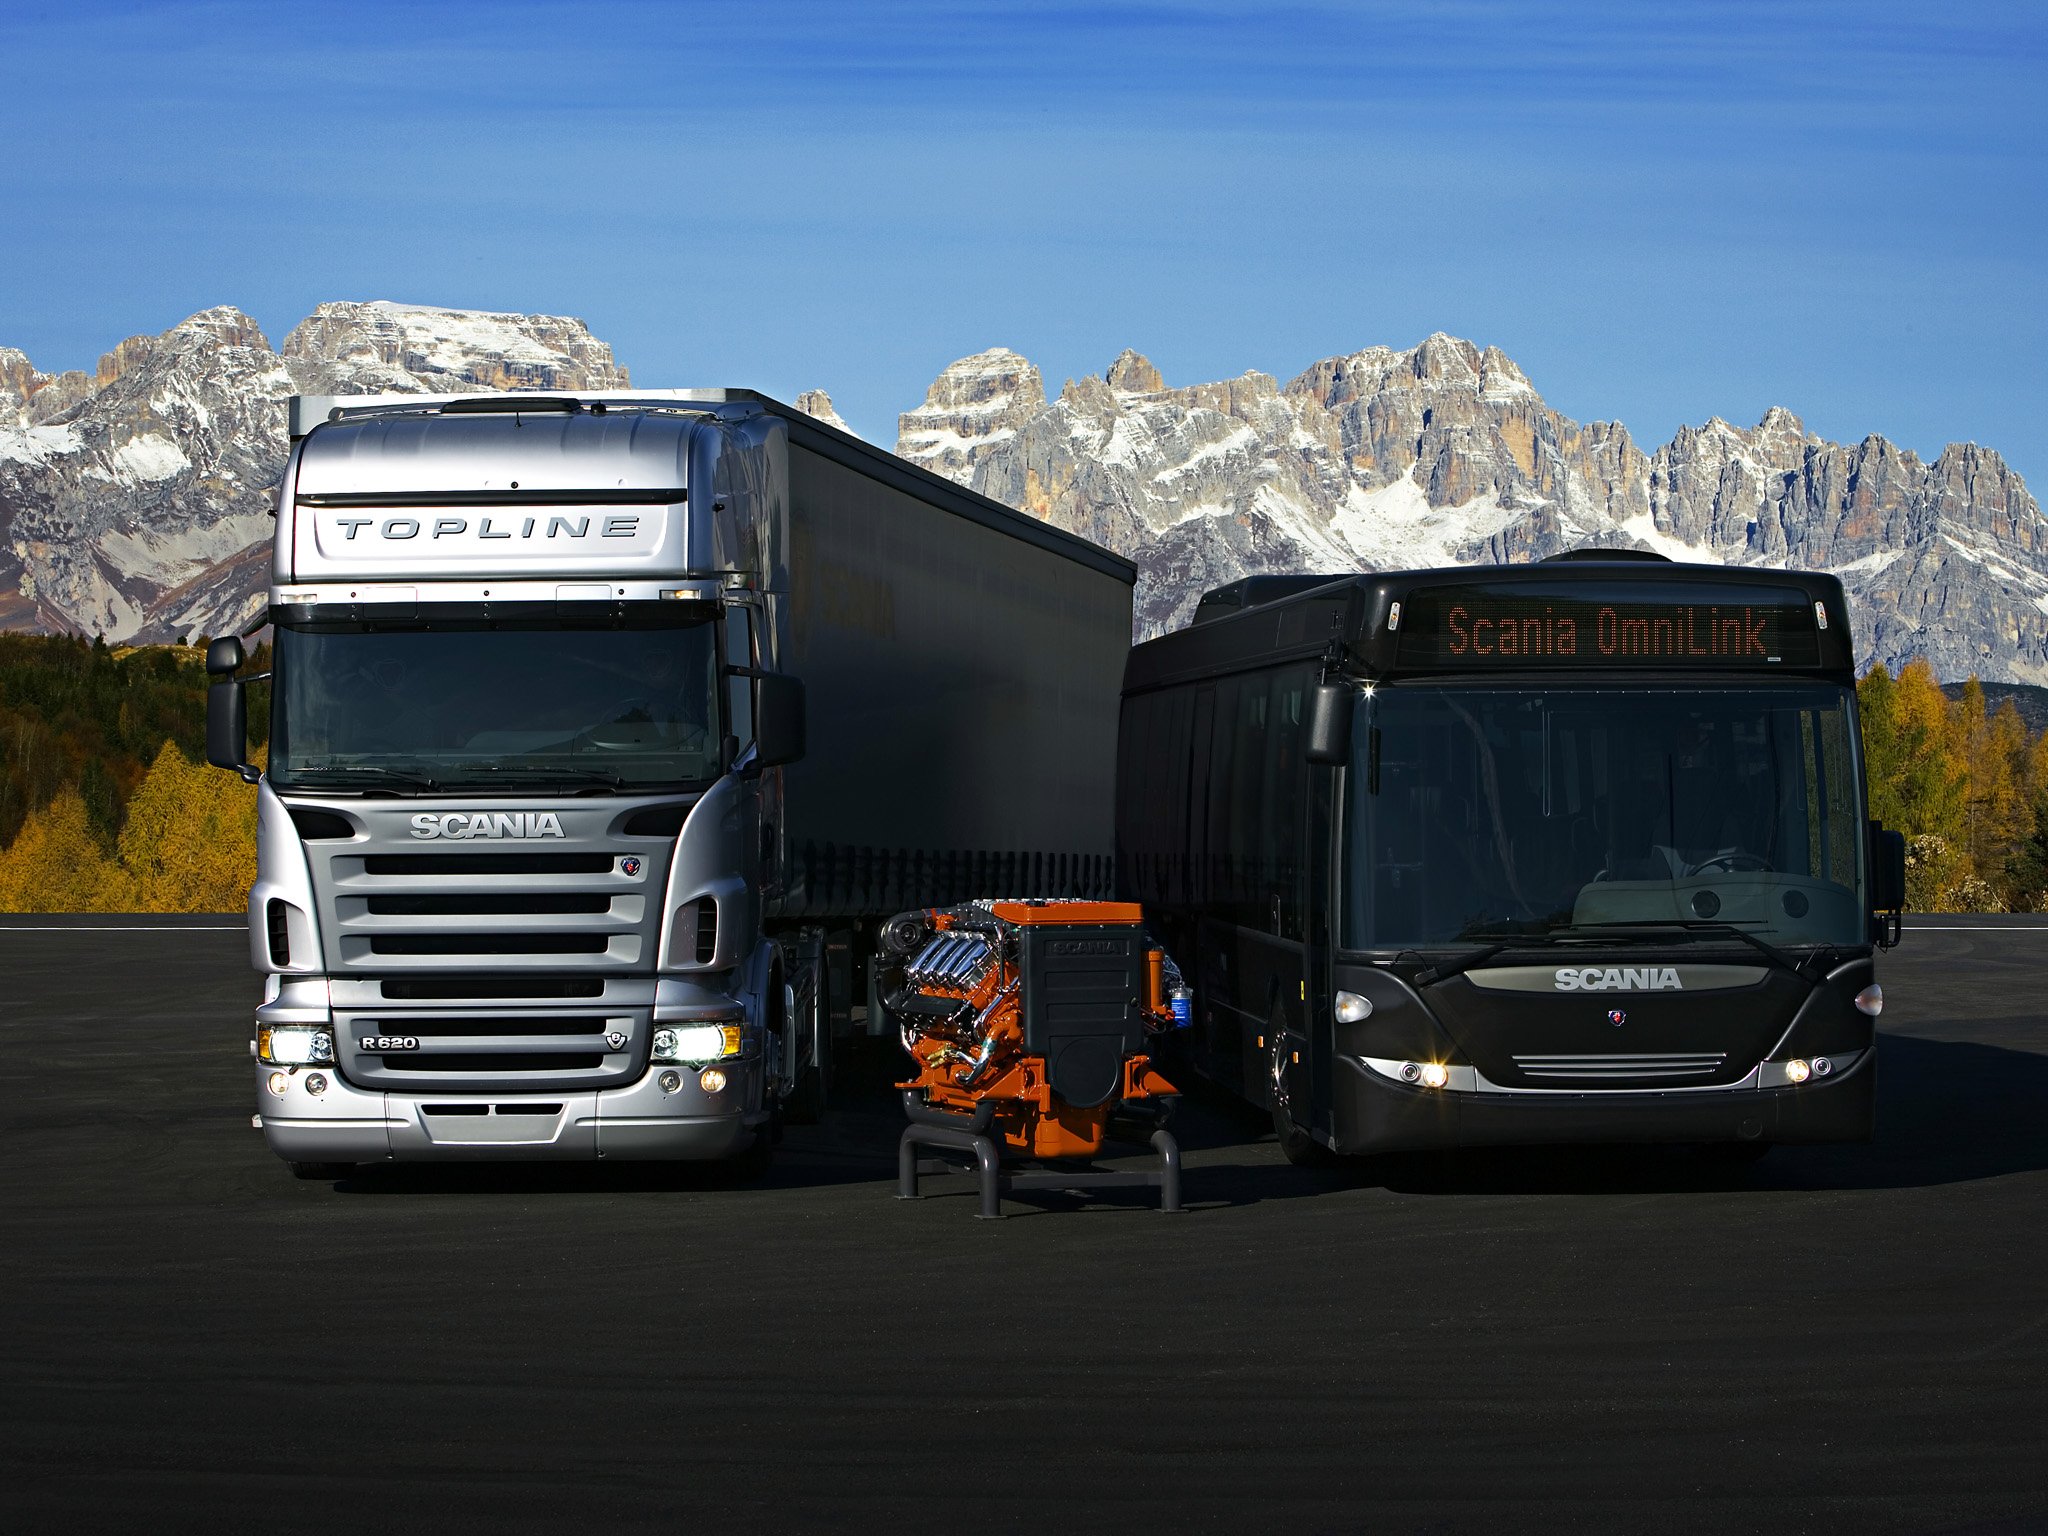 Gallery For Gt Scania Bus Wallpaper